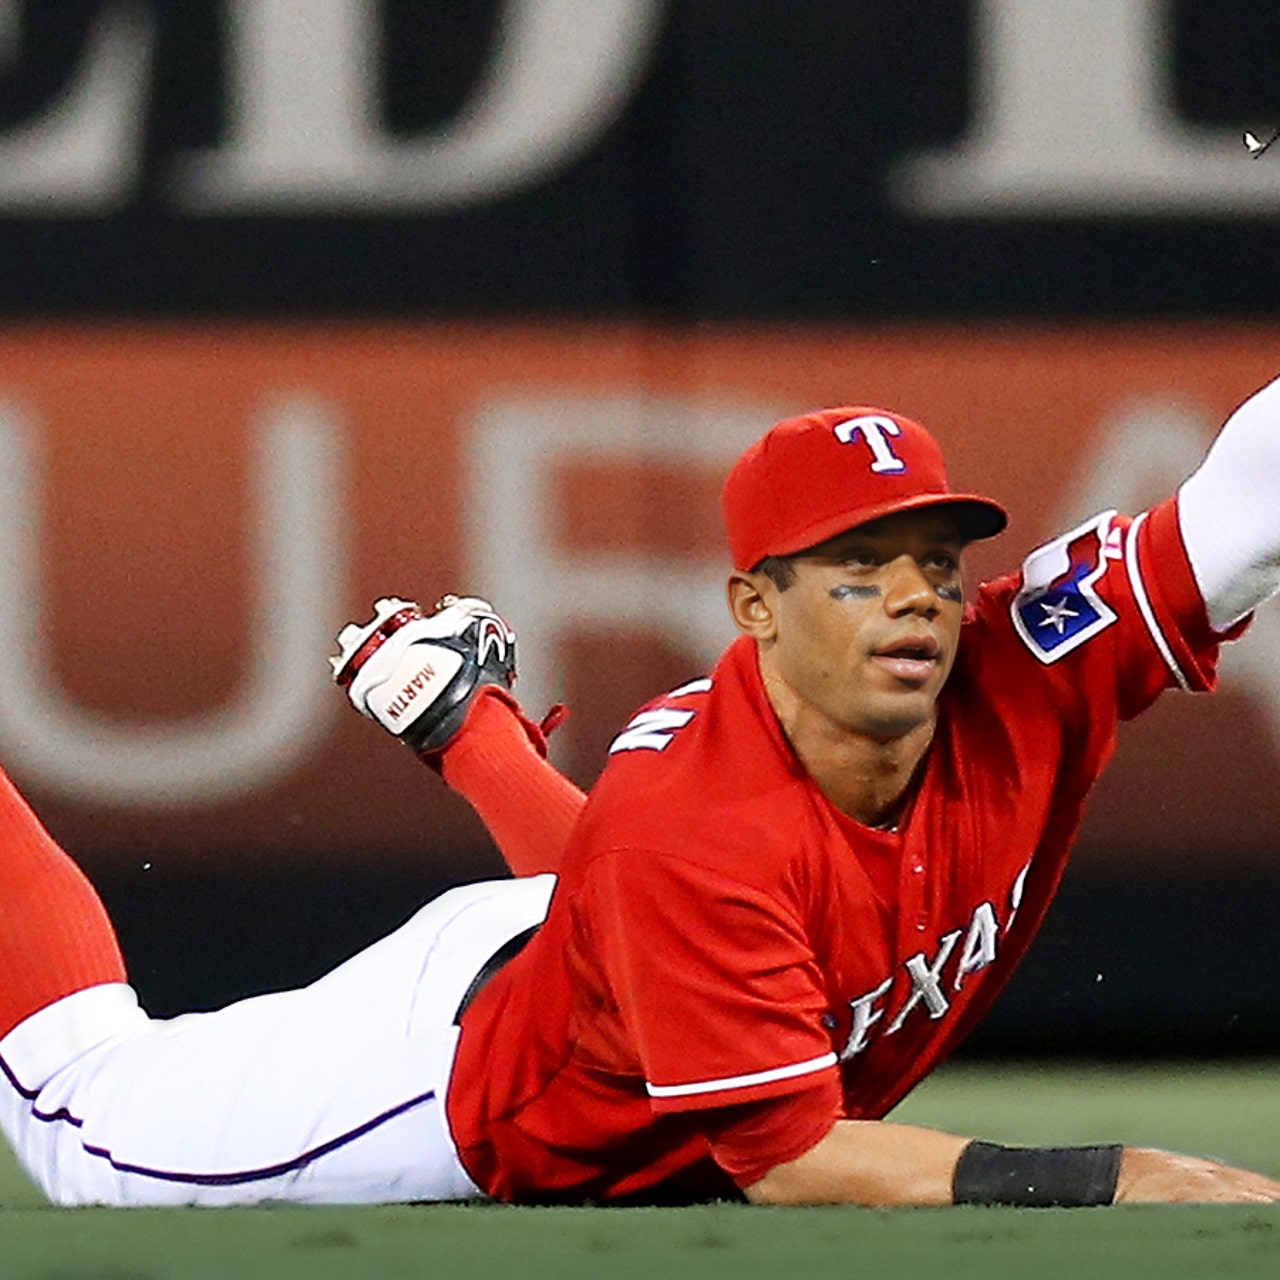 Here's what Russell Wilson would look like in a Rangers uniform